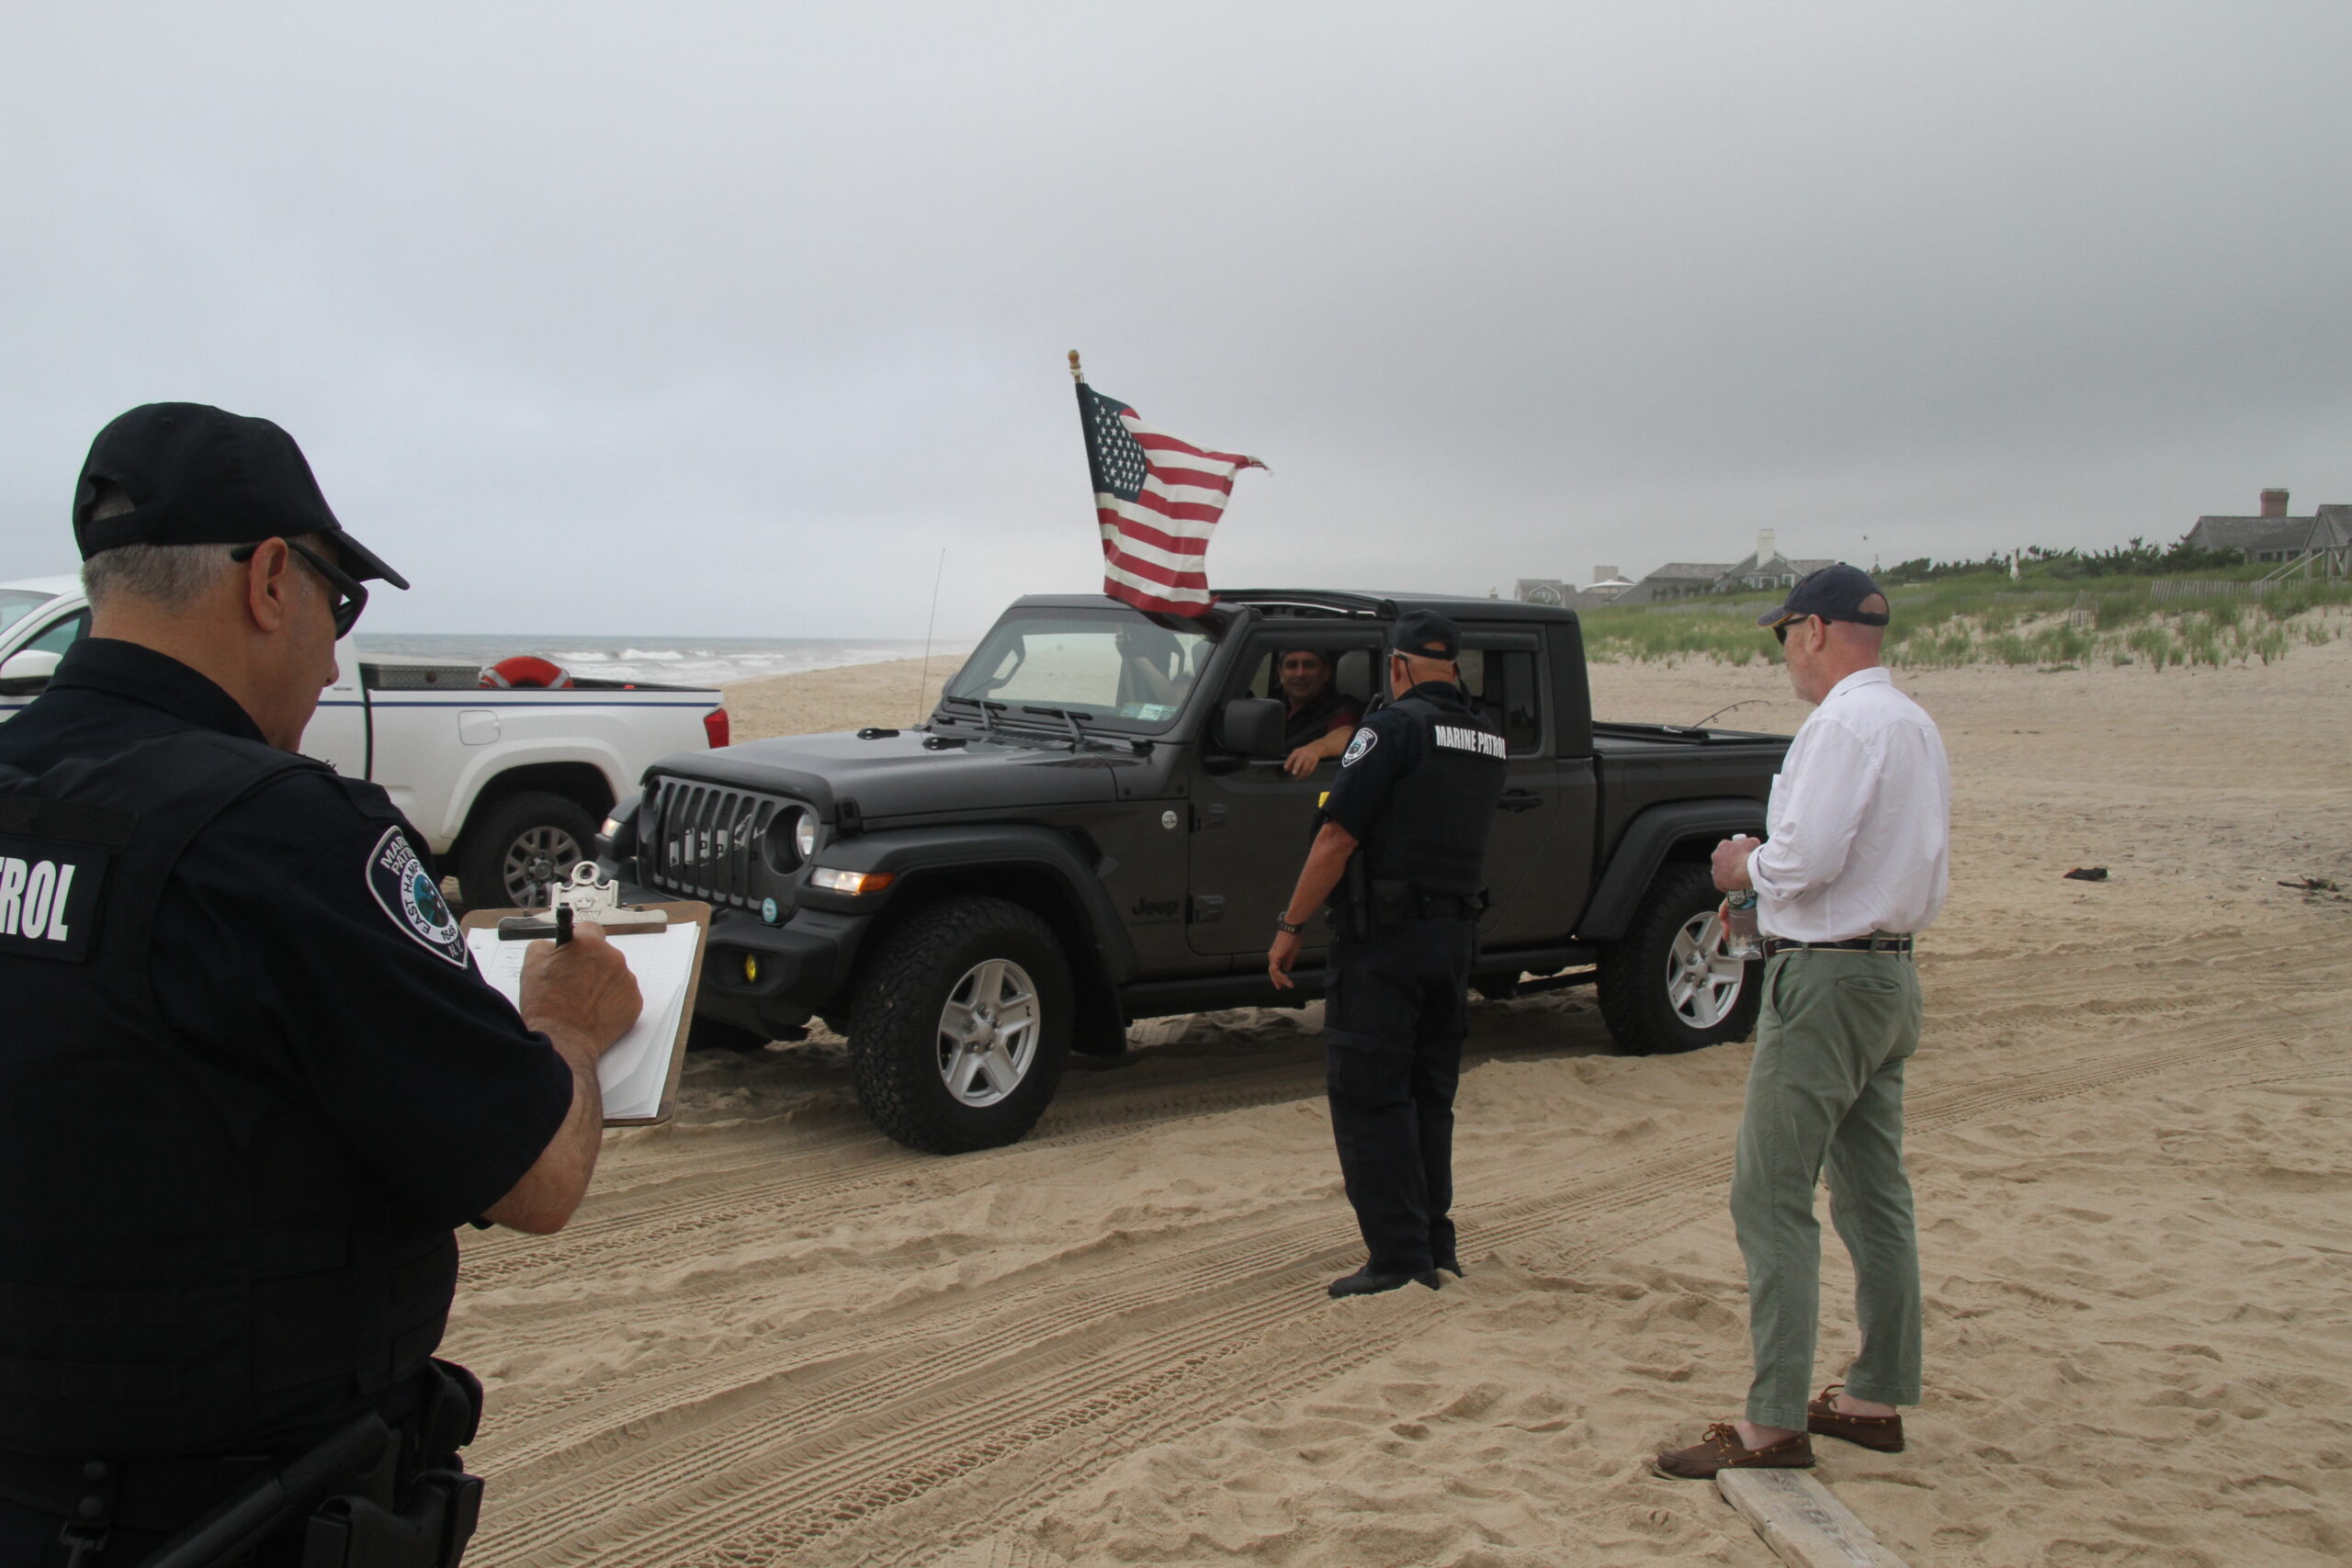 In June 2021, fishermen and 4x4 owners staged a willful violation of the court orders to keep 4x4 vehicles off the beach in Amagansett. Town Marine Patrol officers logged the violators' license plate numbers but did not block the vehicles from entering the beach.